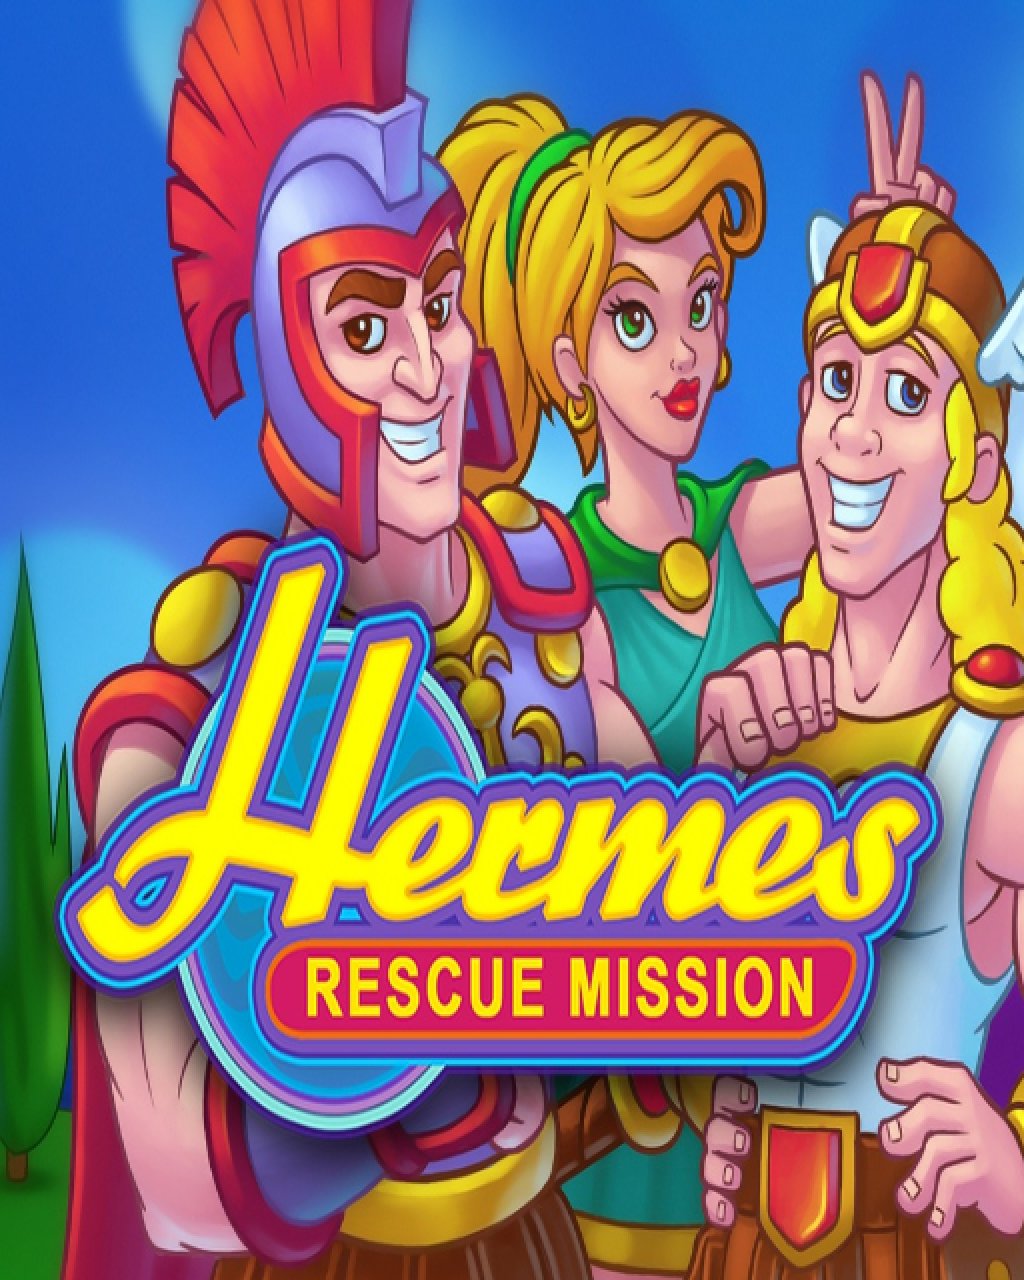 Hermes Rescue Mission